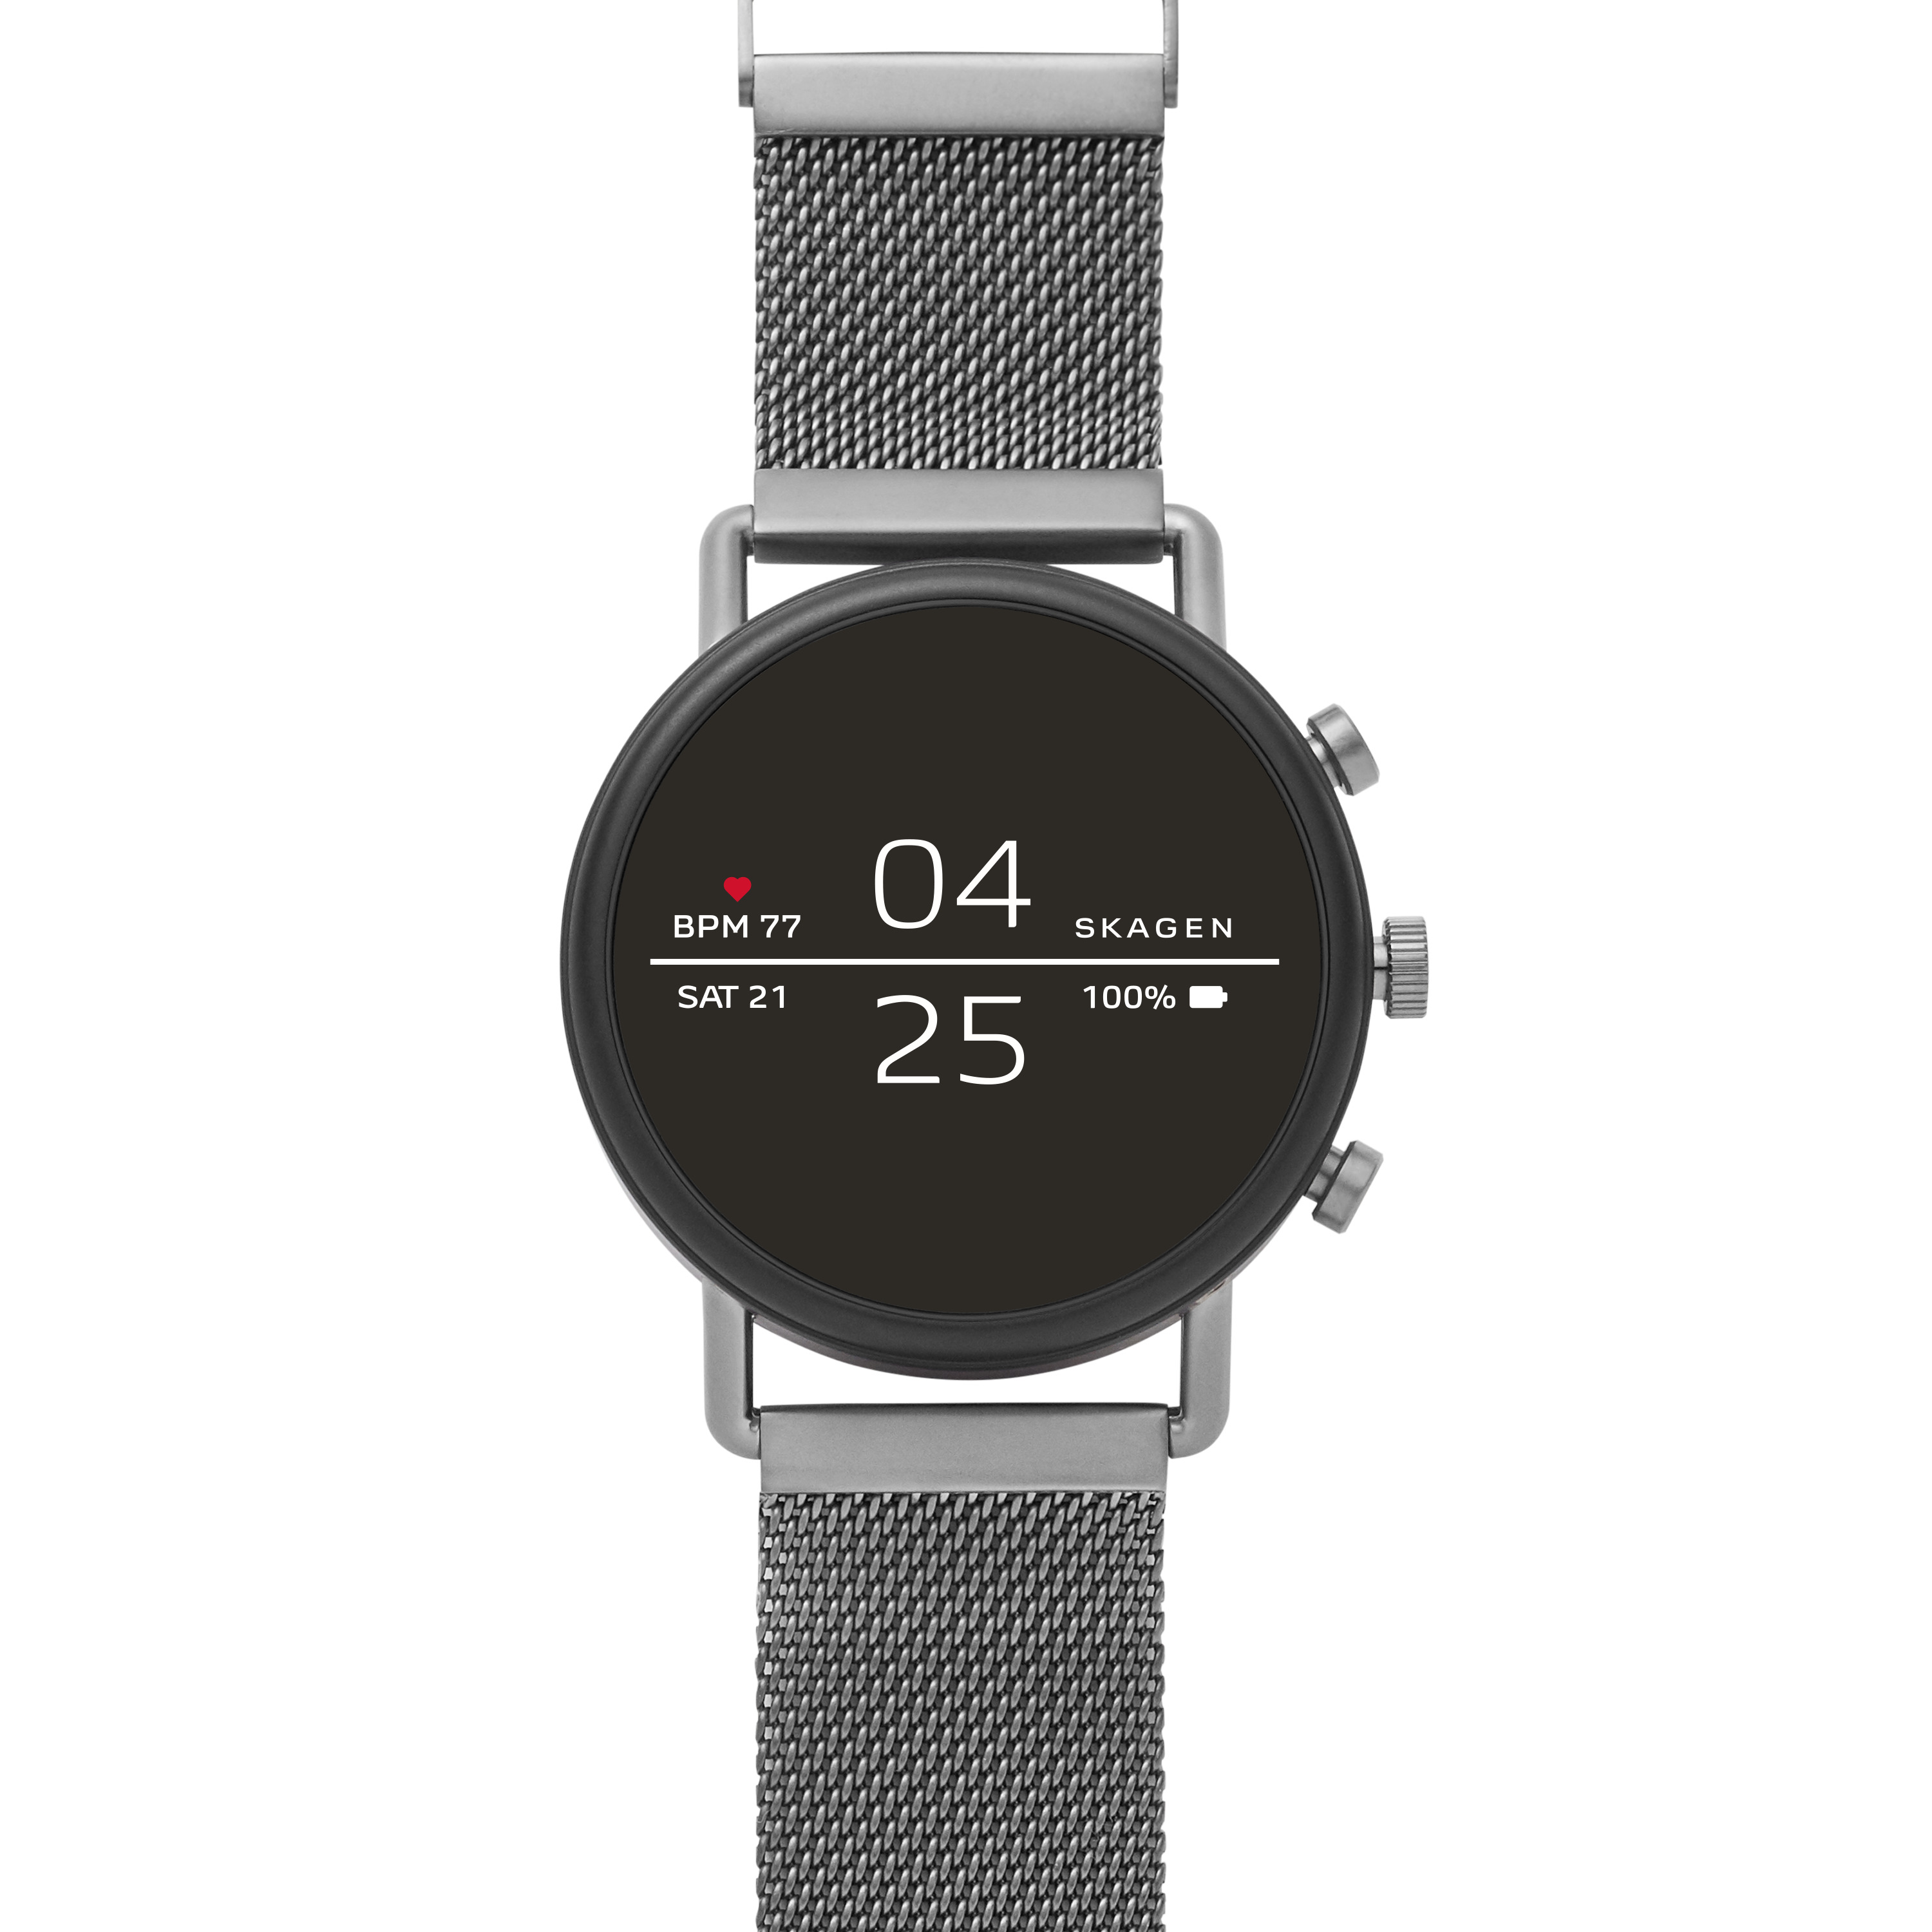 SKAGEN Falster 2 watch announced at IFA